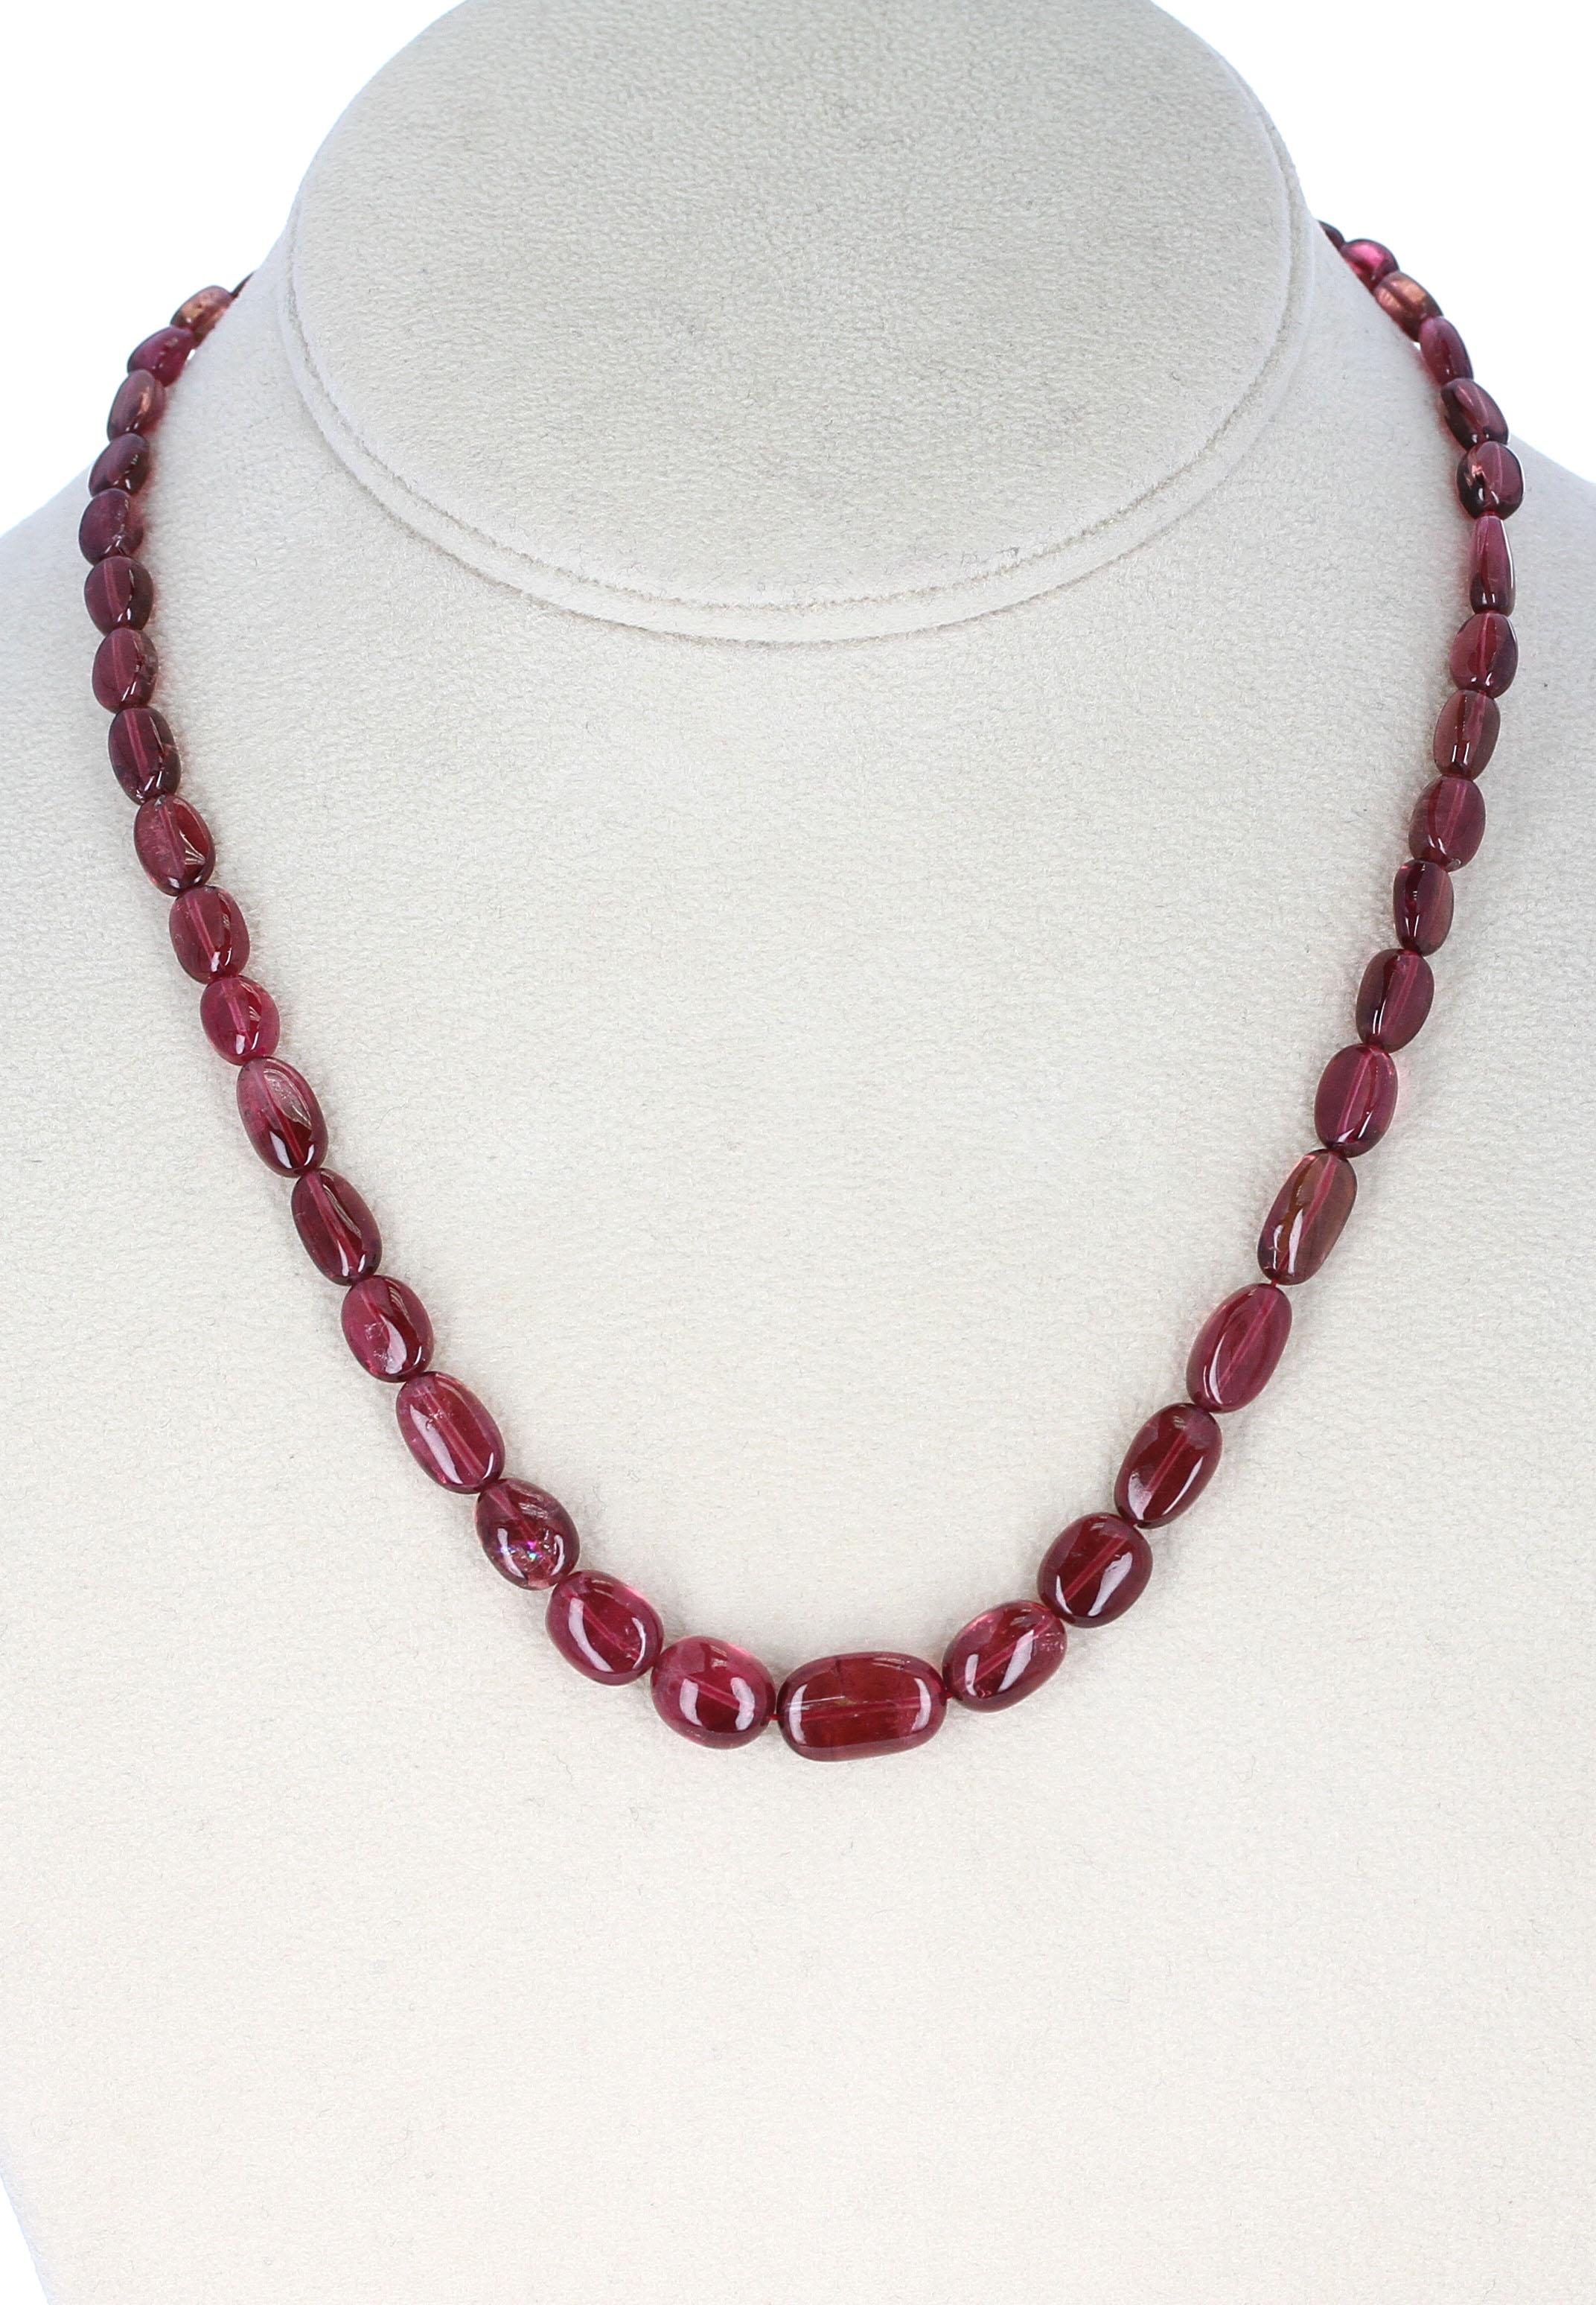 Tourmaline Smooth Tumbled Beads Necklace, Toggle Clasp In Excellent Condition For Sale In New York, NY